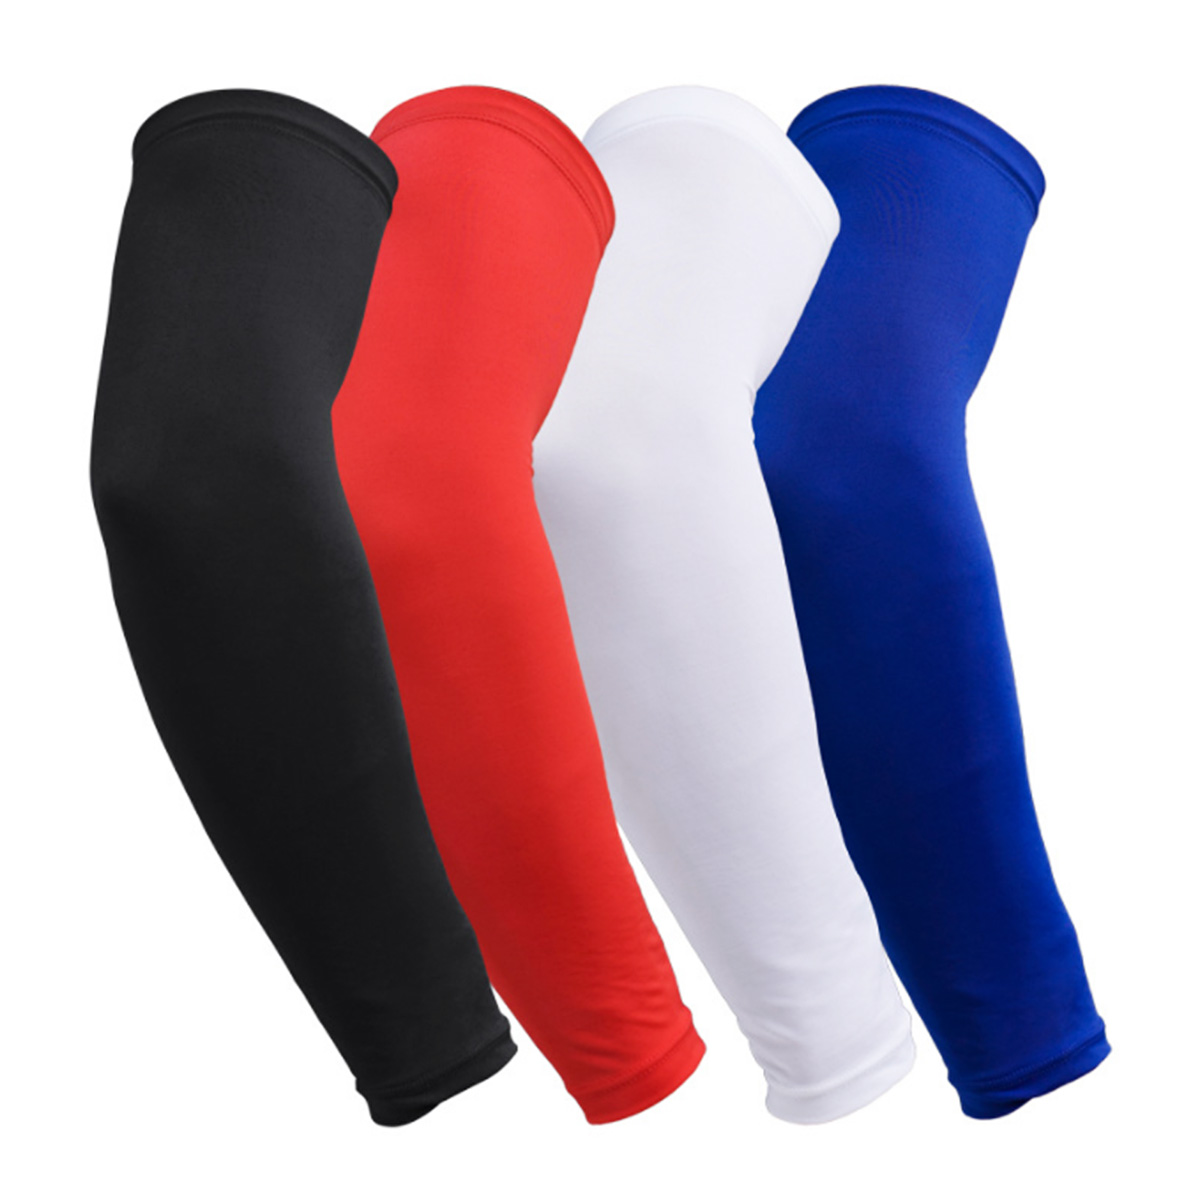 Ferstelbere Polyester Arm Sleeves Elbow Support